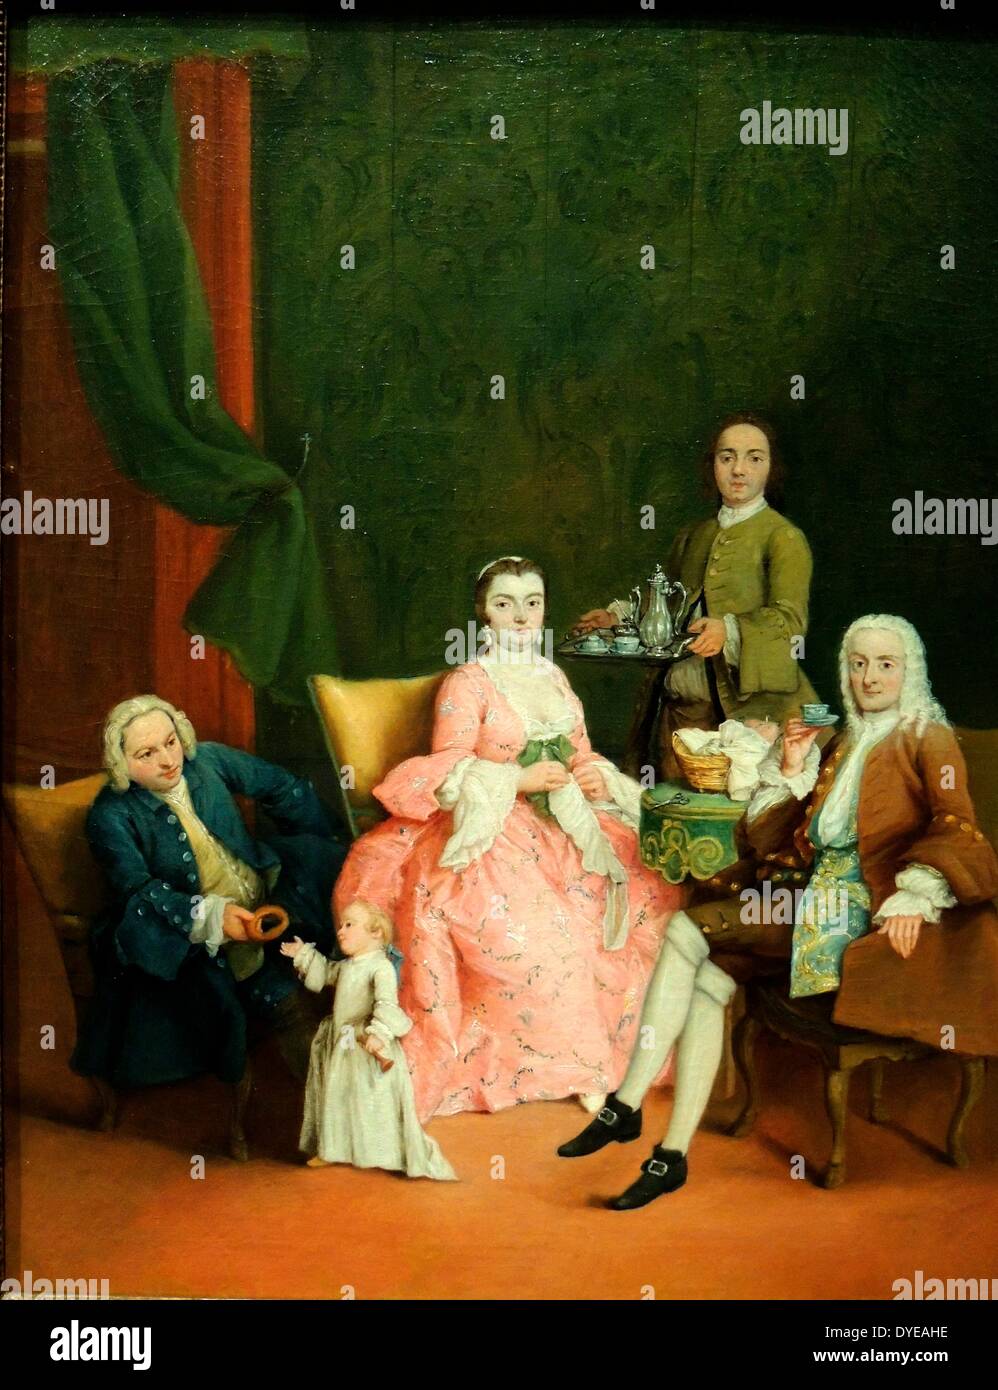 Portrait of a Venetian Family with a Manservant Serving Coffee by Pietro longhi (1702-1785) oil on canvas, c1752. In his paintings, Longhi usually poked gentle fun at the everyday activities of the Venetian elite. This is not, however the case here. It is simply a portrait of a family drinking coffee, with the lady of the house taking centre stage. The conspicuous inclusion of the servant is noteworthy. He must have been a valued member of the household. Stock Photo